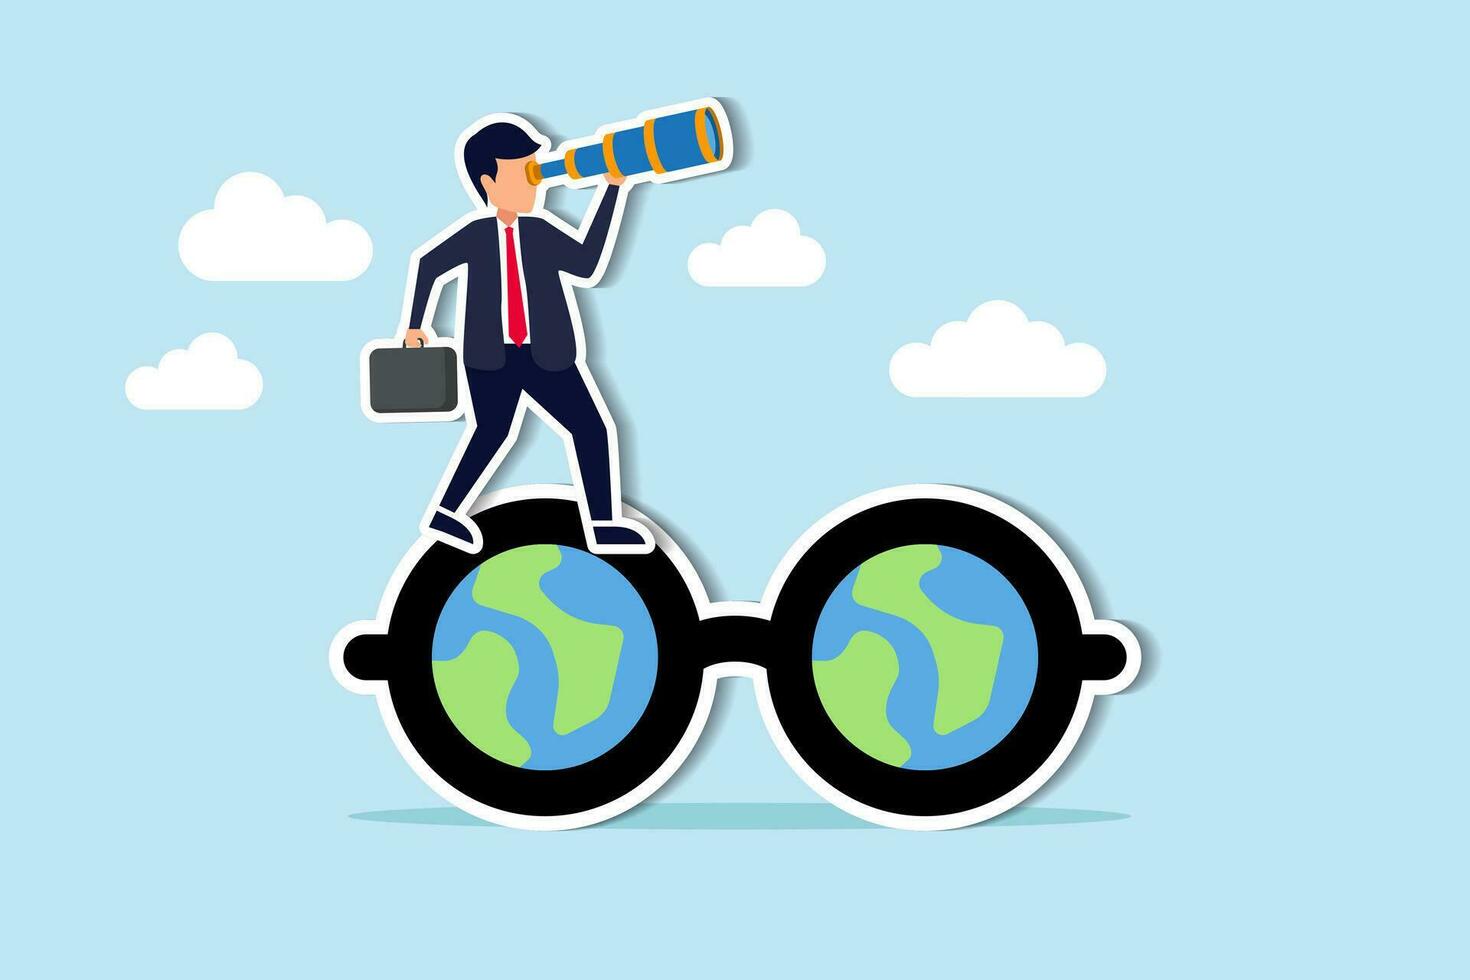 Global or world business vision, international business opportunity, searching for job, career or working abroad concept, businessman look through telescope on eyeglasses with world map. vector